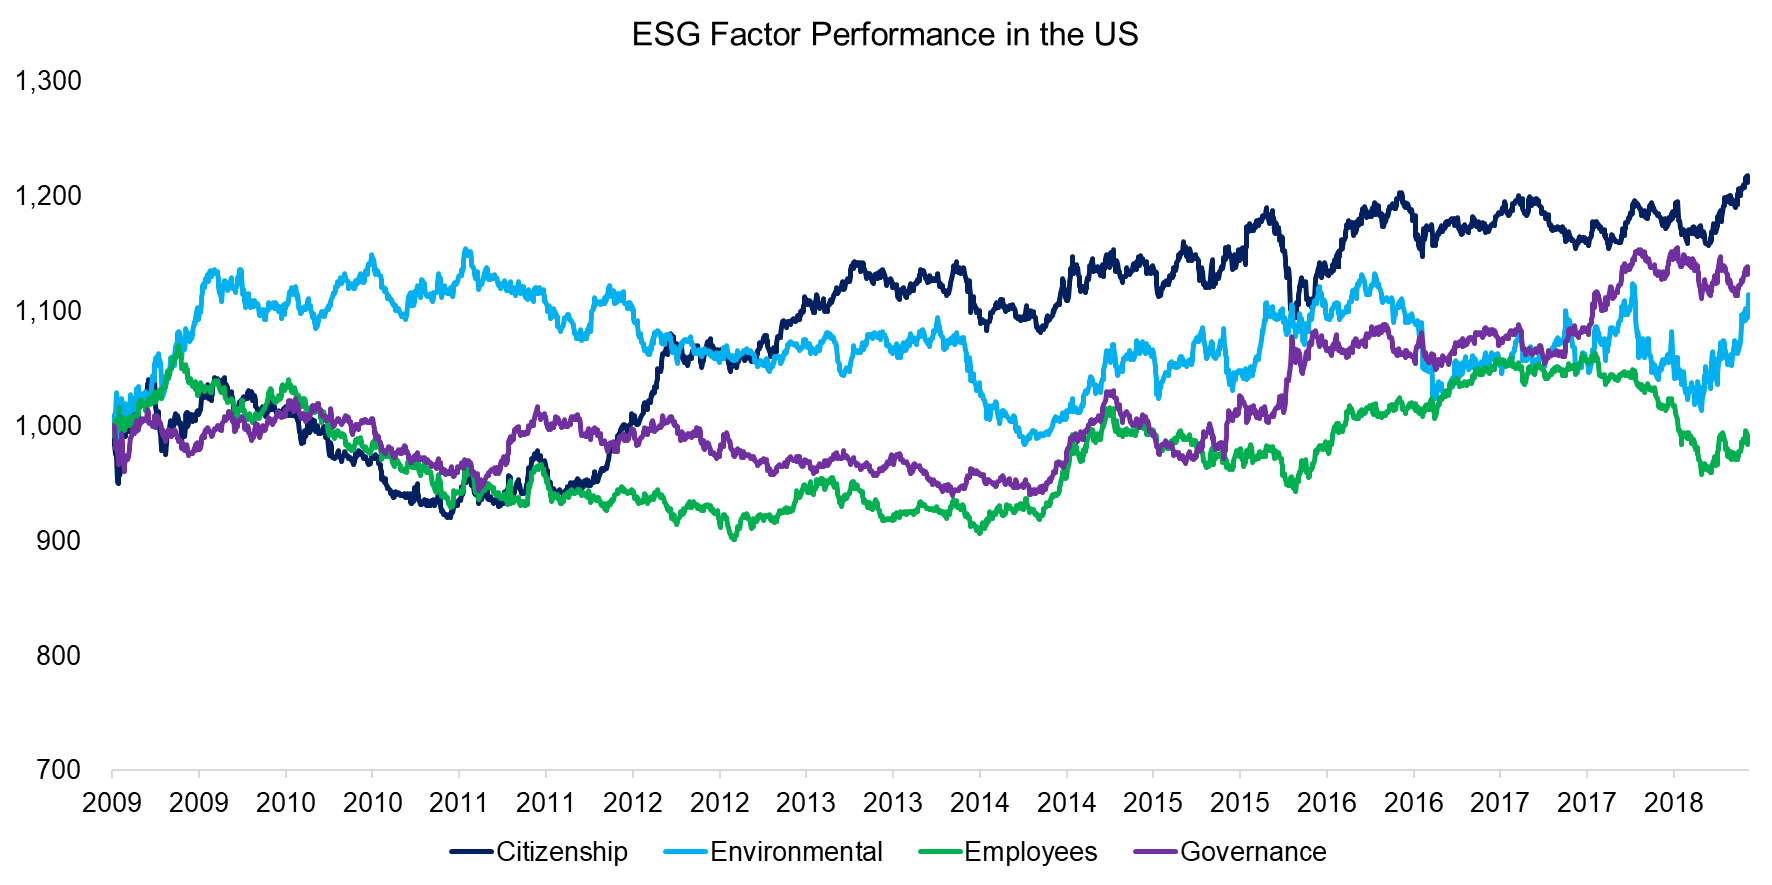 ESG Factor Performance in the US